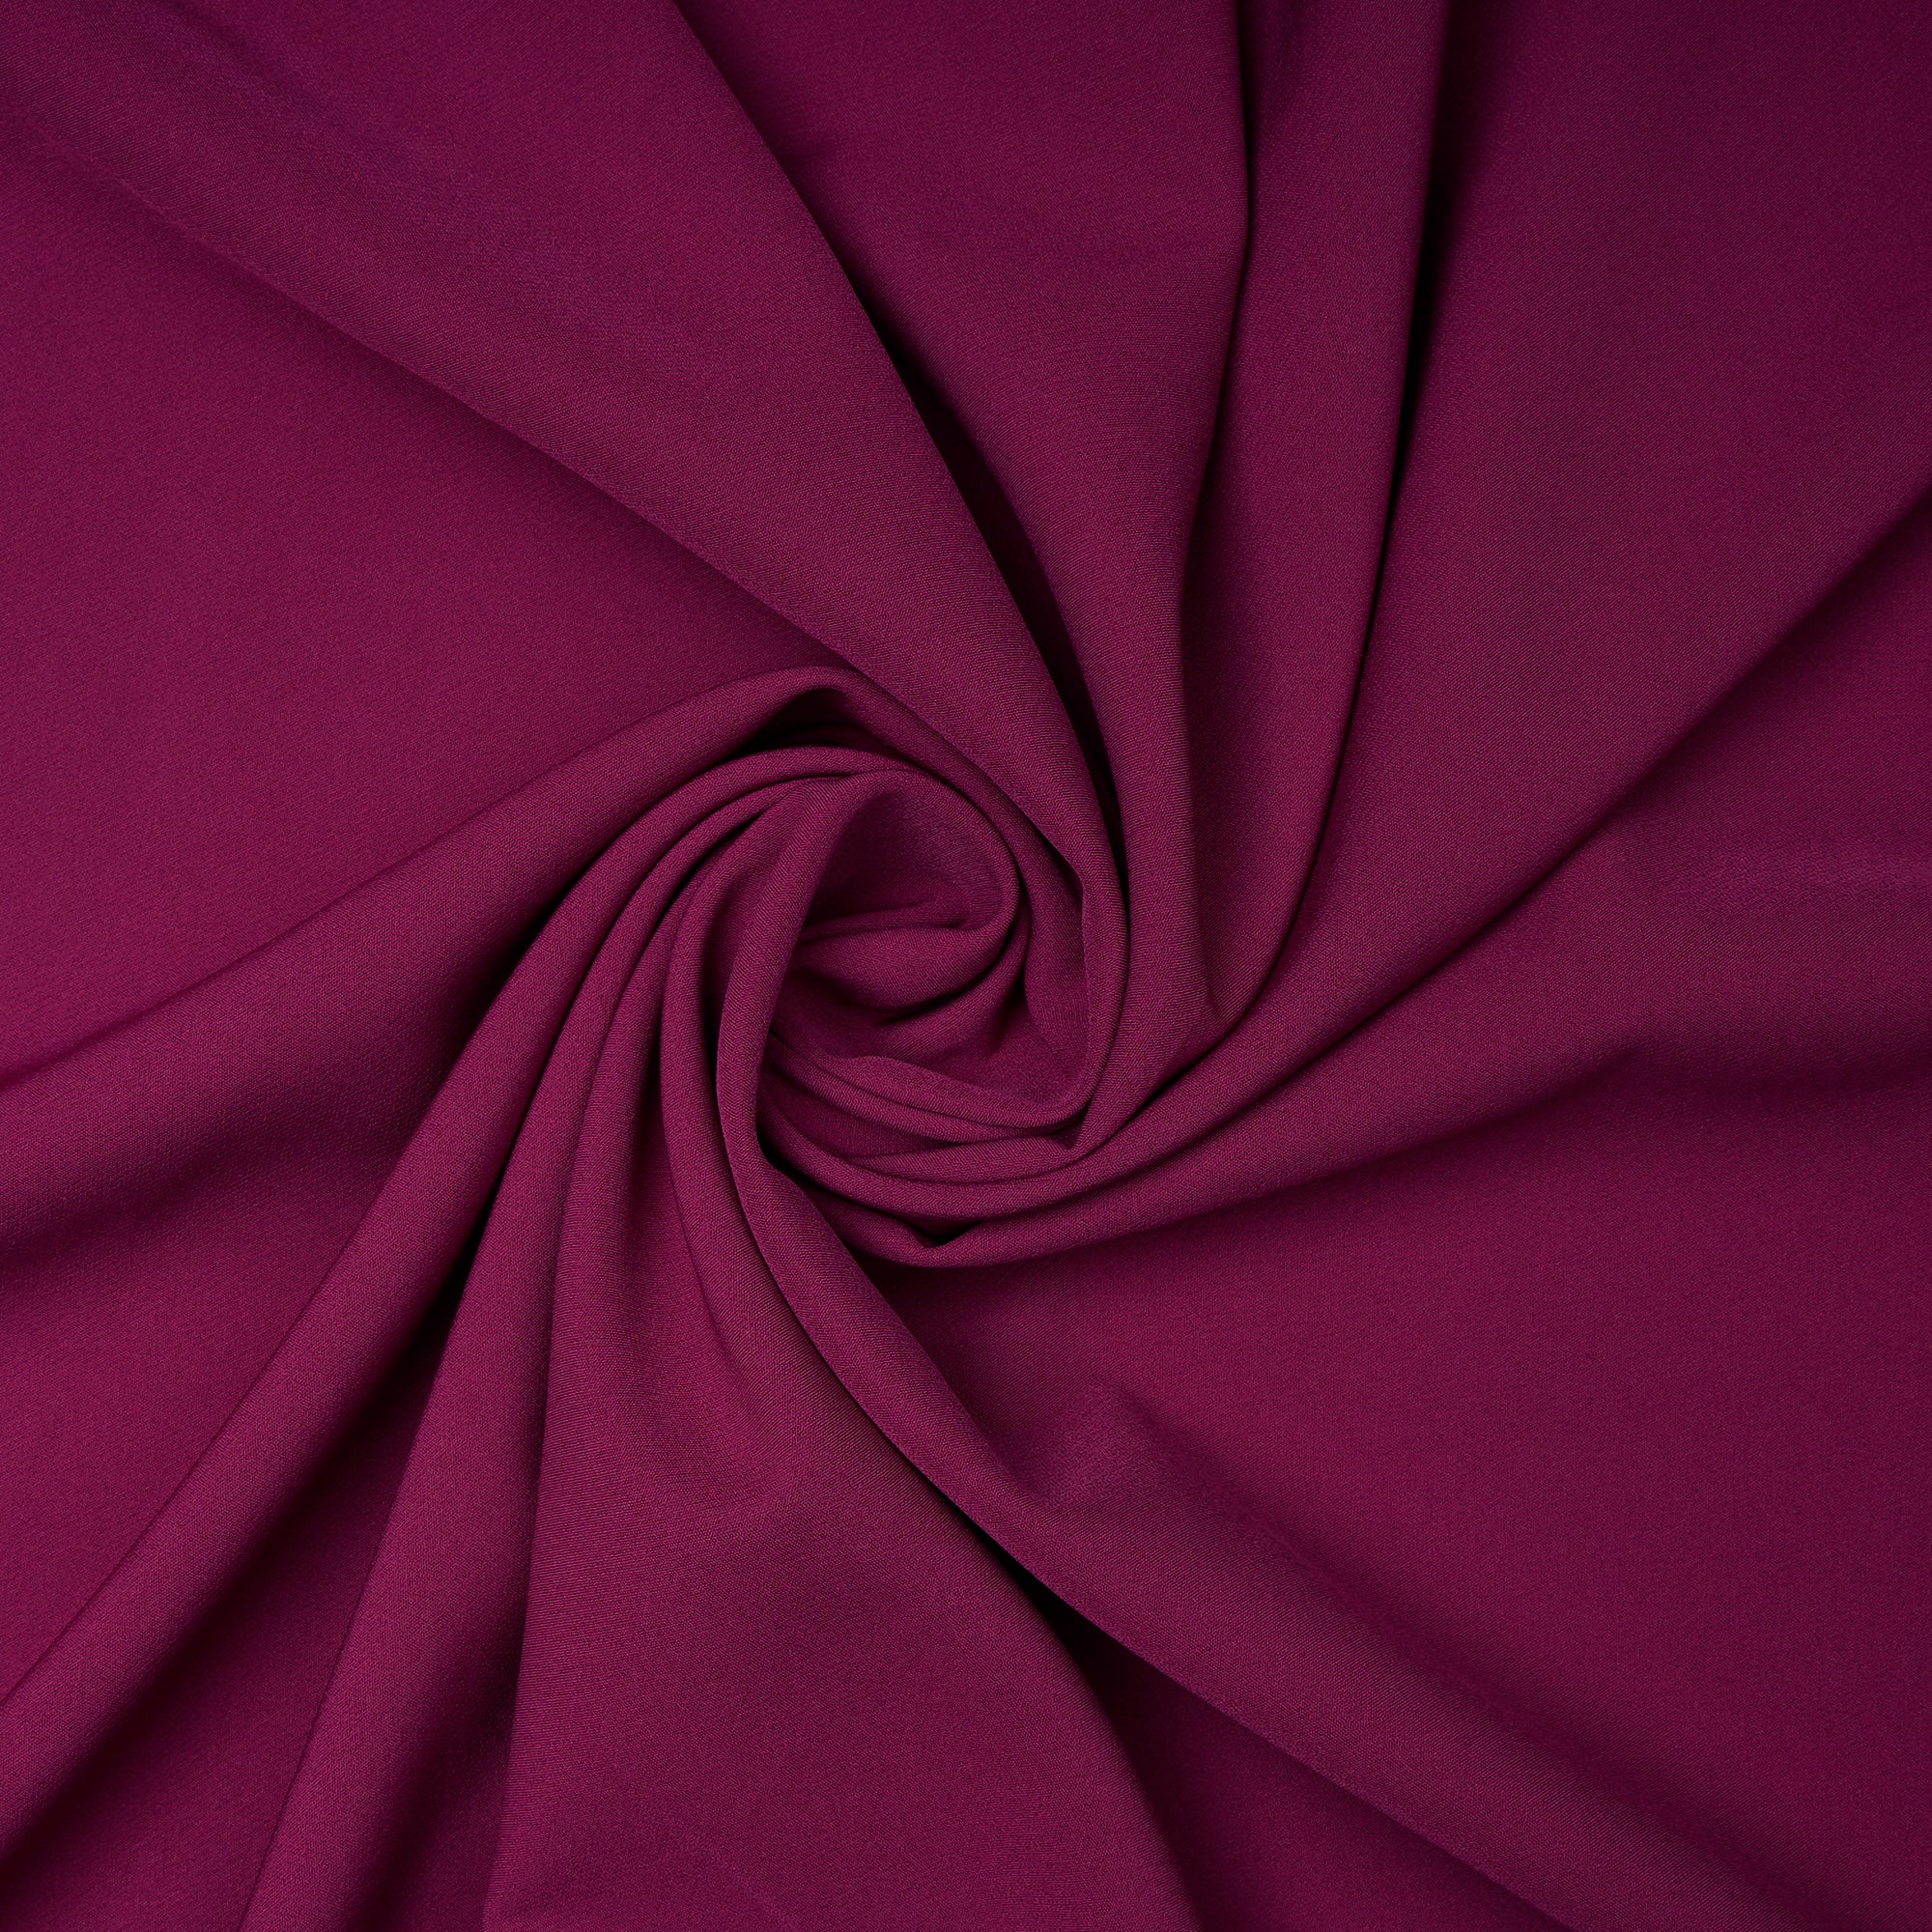 Buy Magenta Solid Dyed Imported Banana Crepe Fabric (60